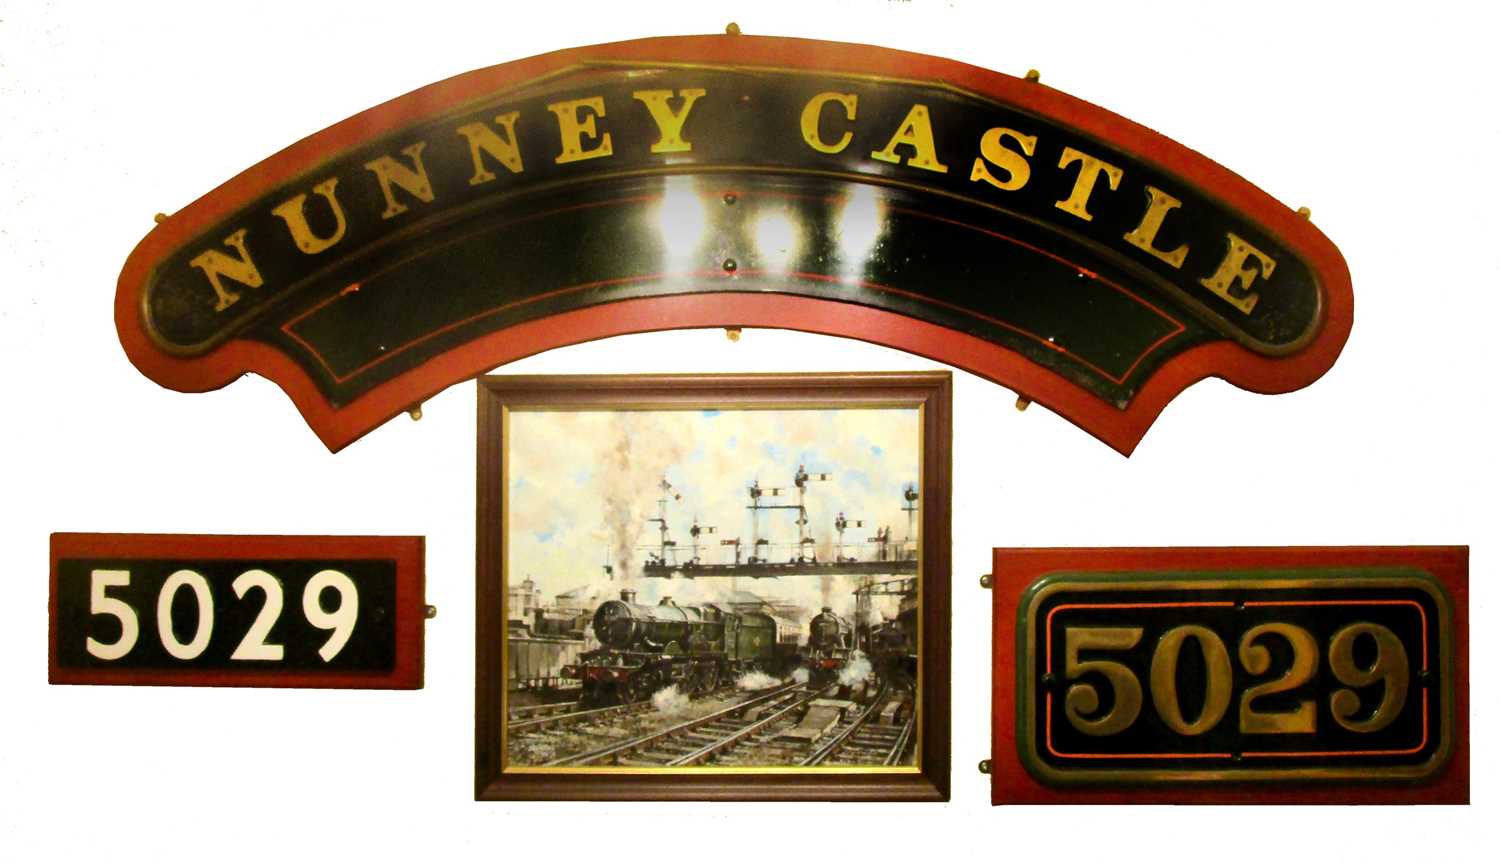 A replica metal locomotive nameplate for Nunney Castle, by Lamb, with cab and smokebox plates '5029' - Image 16 of 20